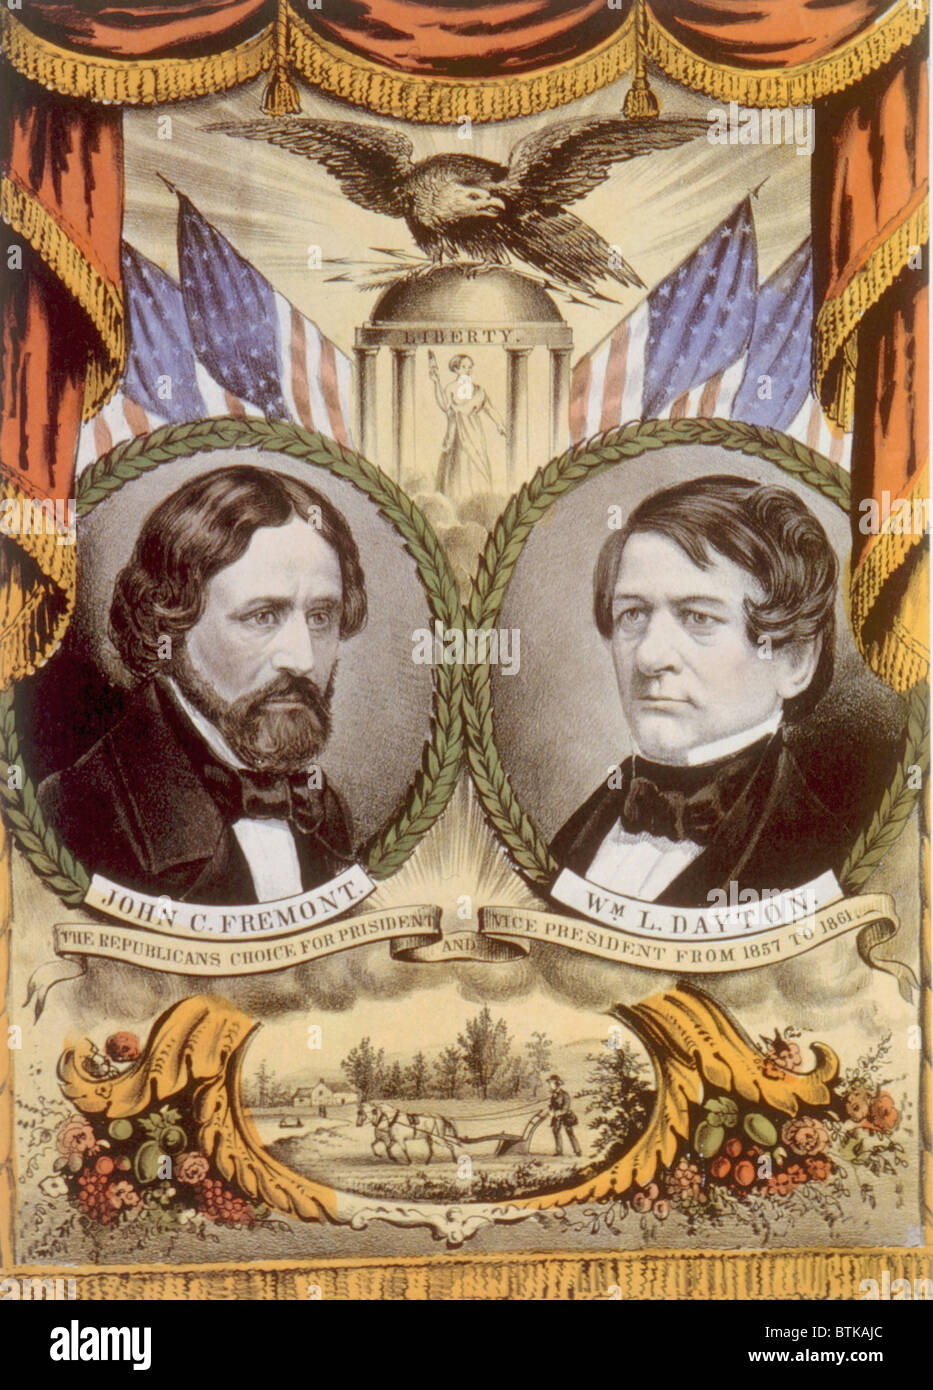 Campaign poster for the Republican ticket of John C. Fremont for president and William L. Dayton for vice president, Currier & Ives, 1856 Stock Photo